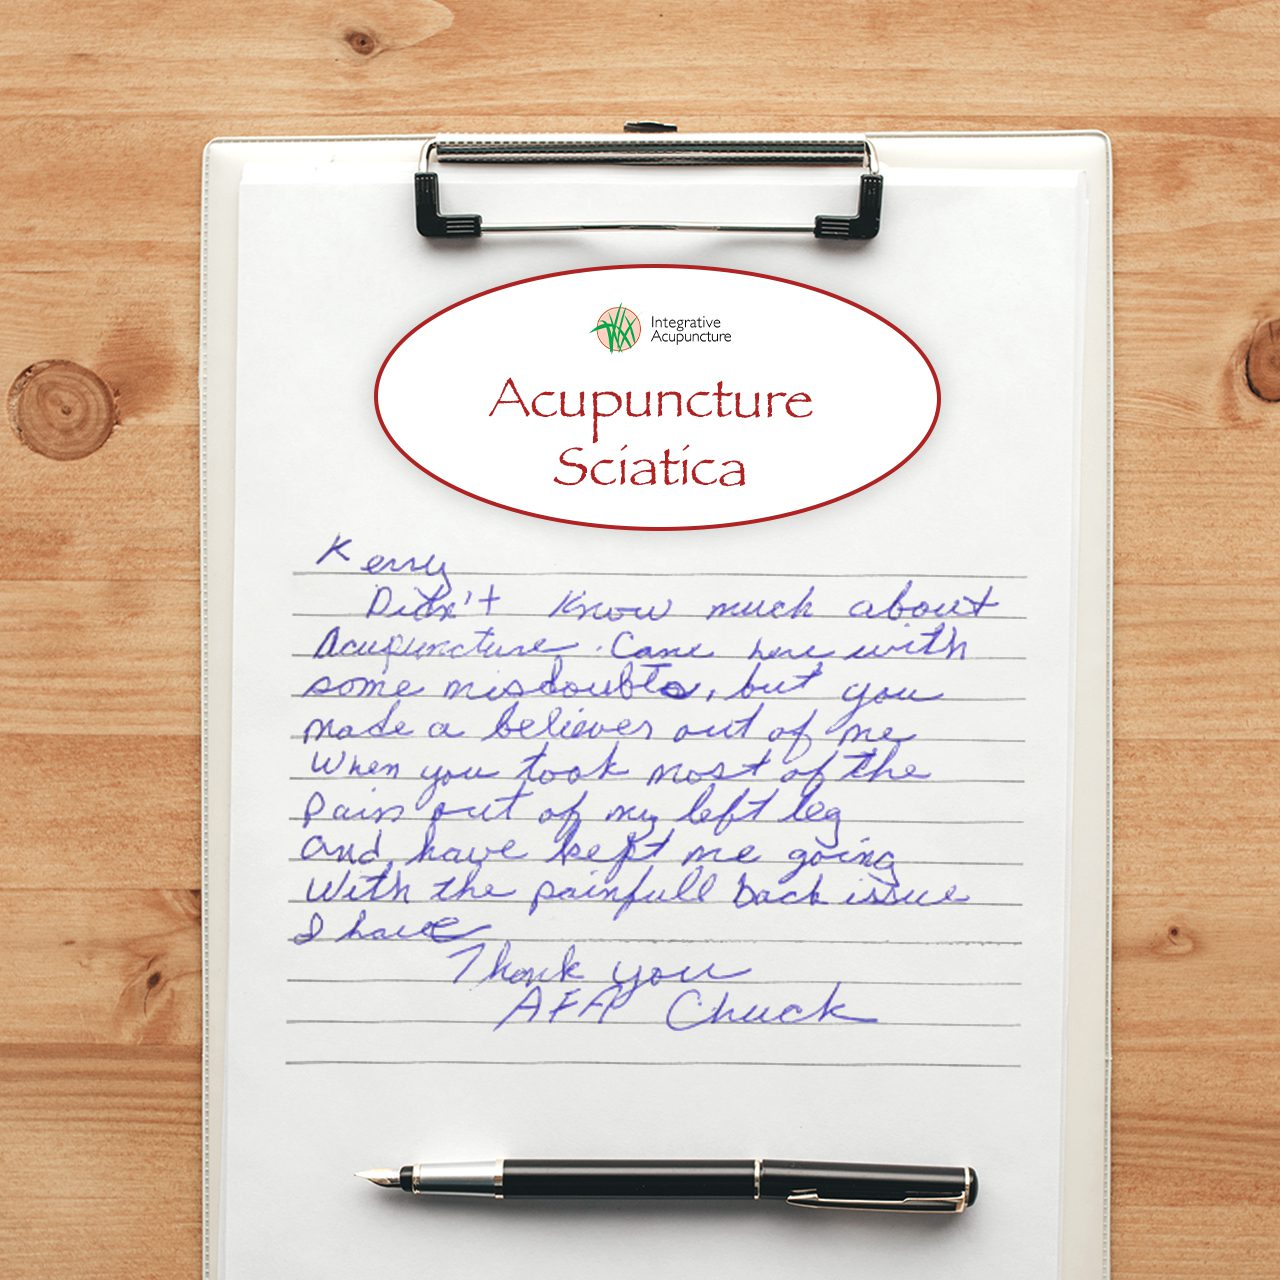 Acupuncture Review